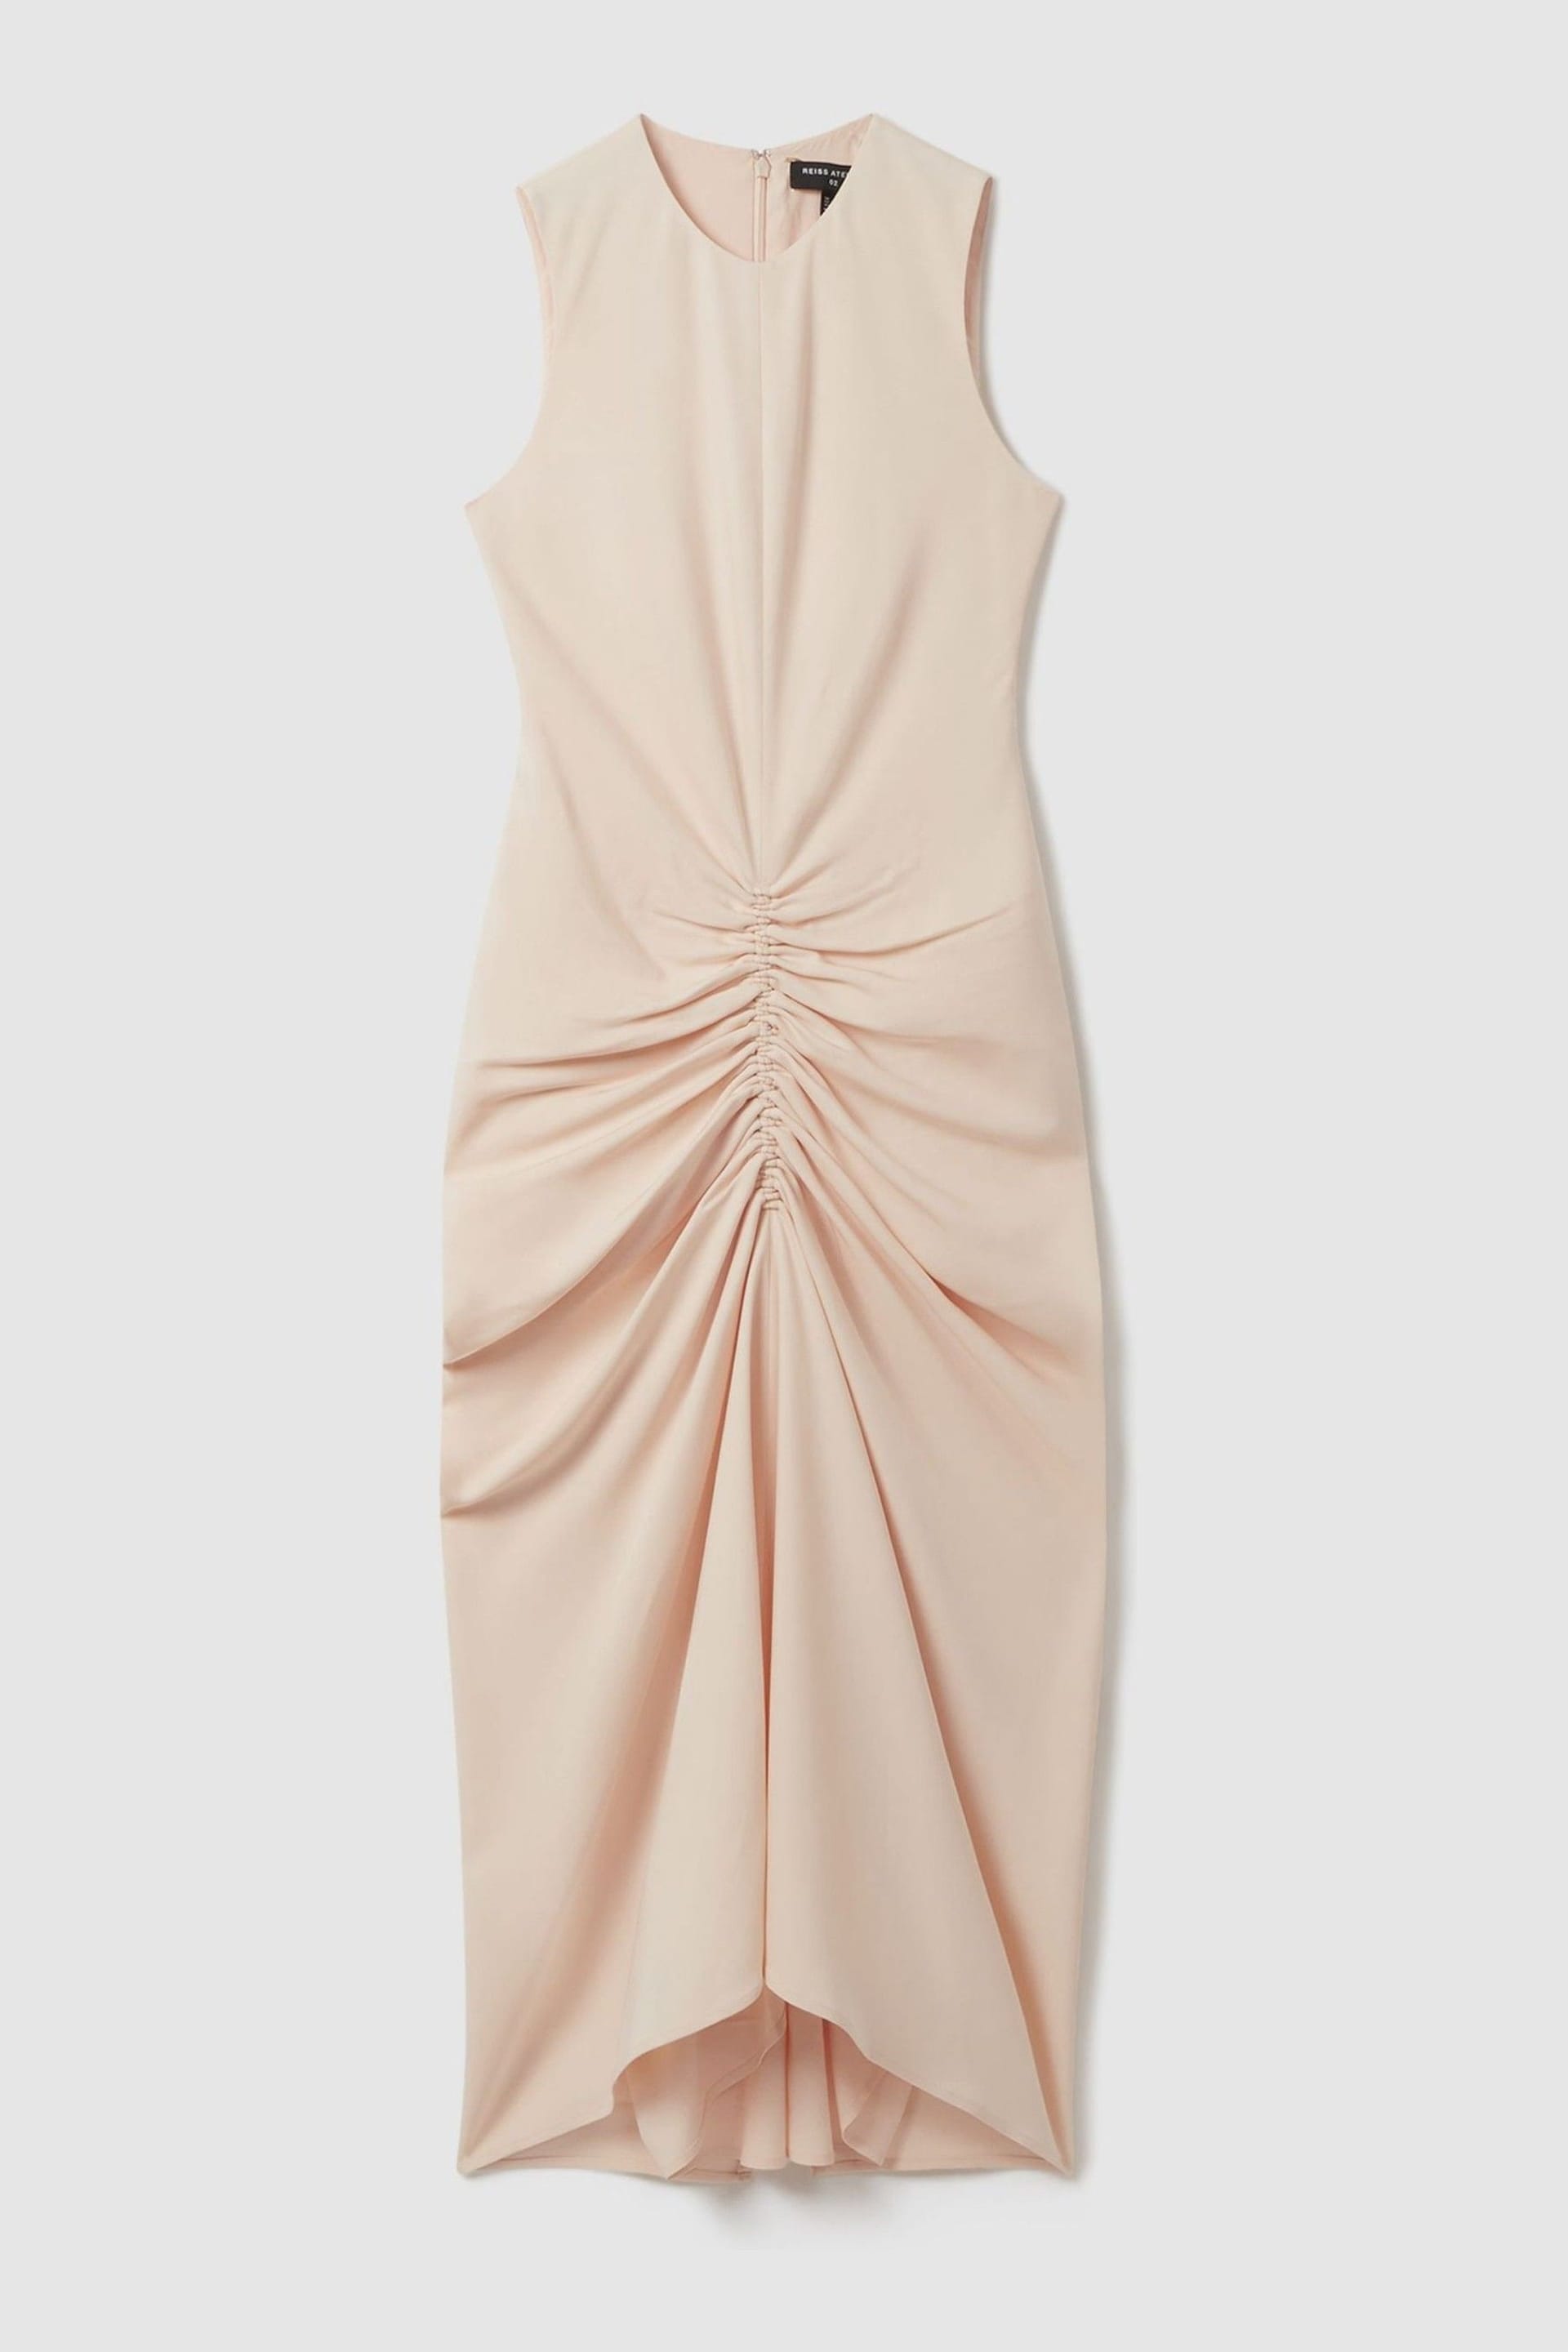 Atelier Felicity Ruched Bodycon Midi Dress - Image 2 of 6